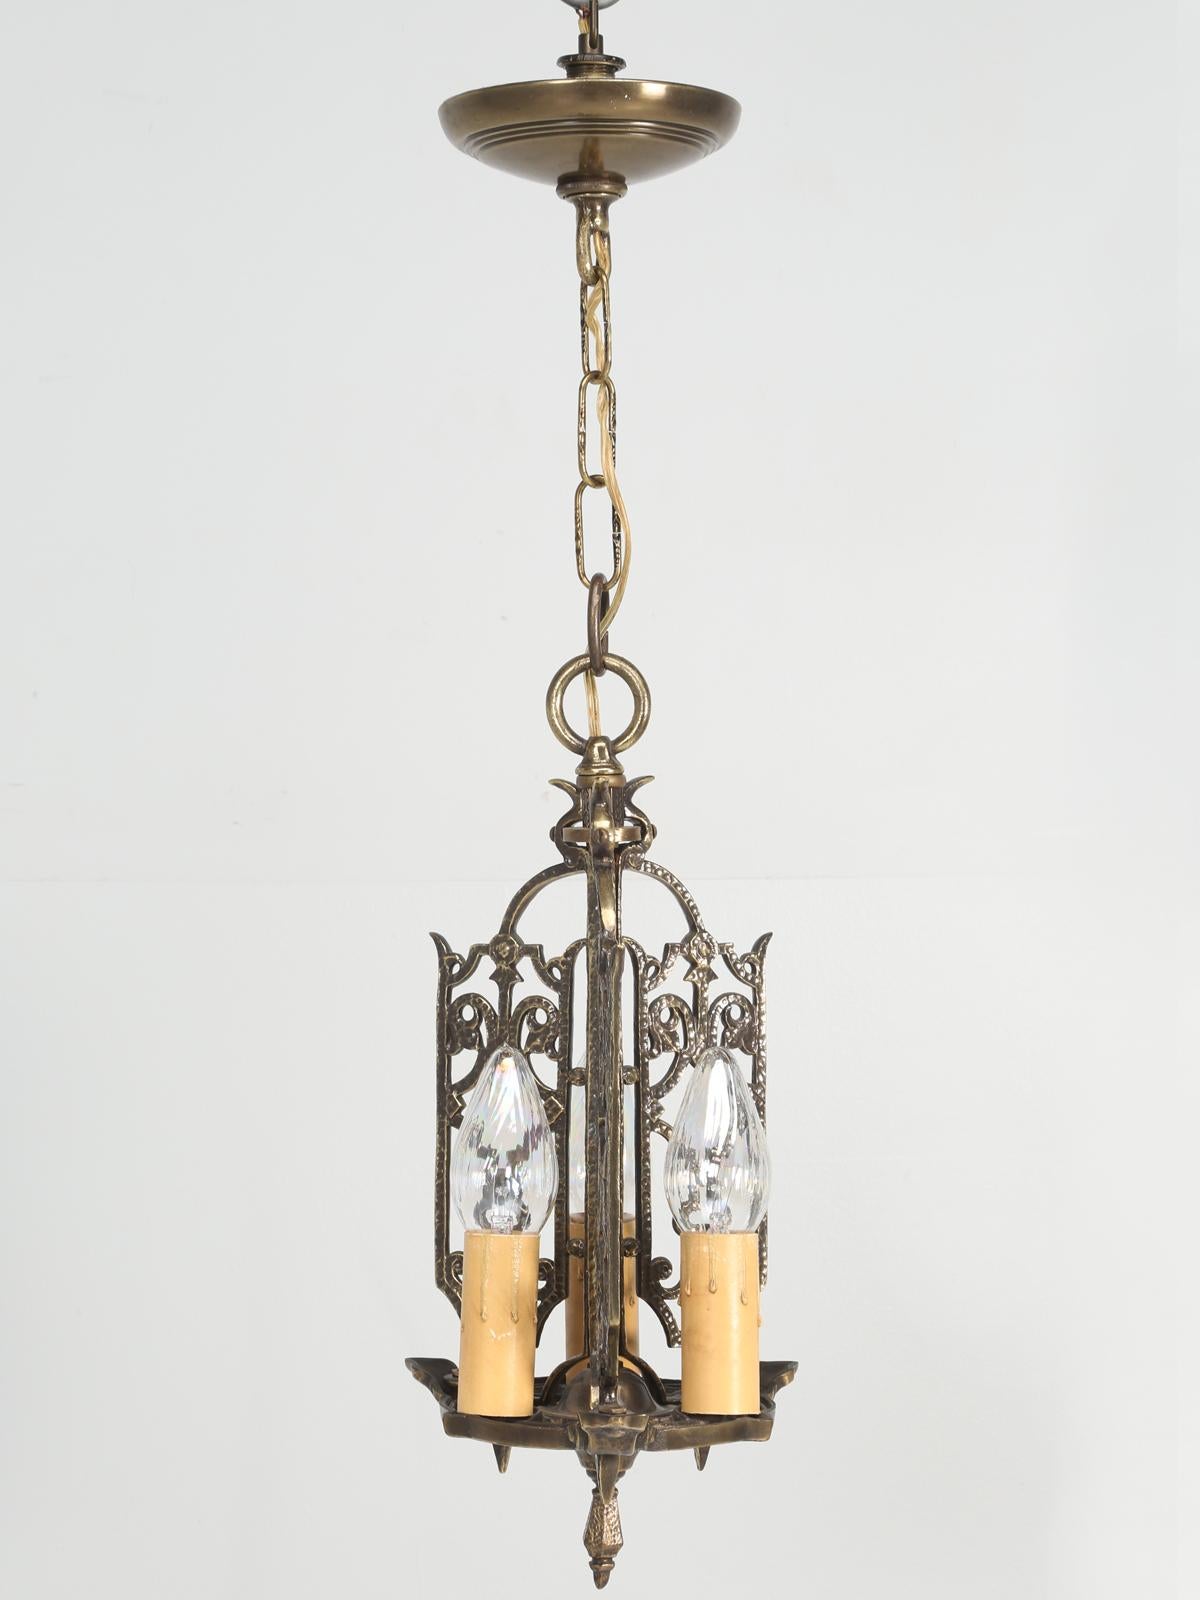 Chandelier, probably manufactured in America, of solid brass and is quite heavy for its size. This was recently removed from a home in the Arts & Craft style, blended with Greek revival. Although the home was built in 1908, we have no idea when the